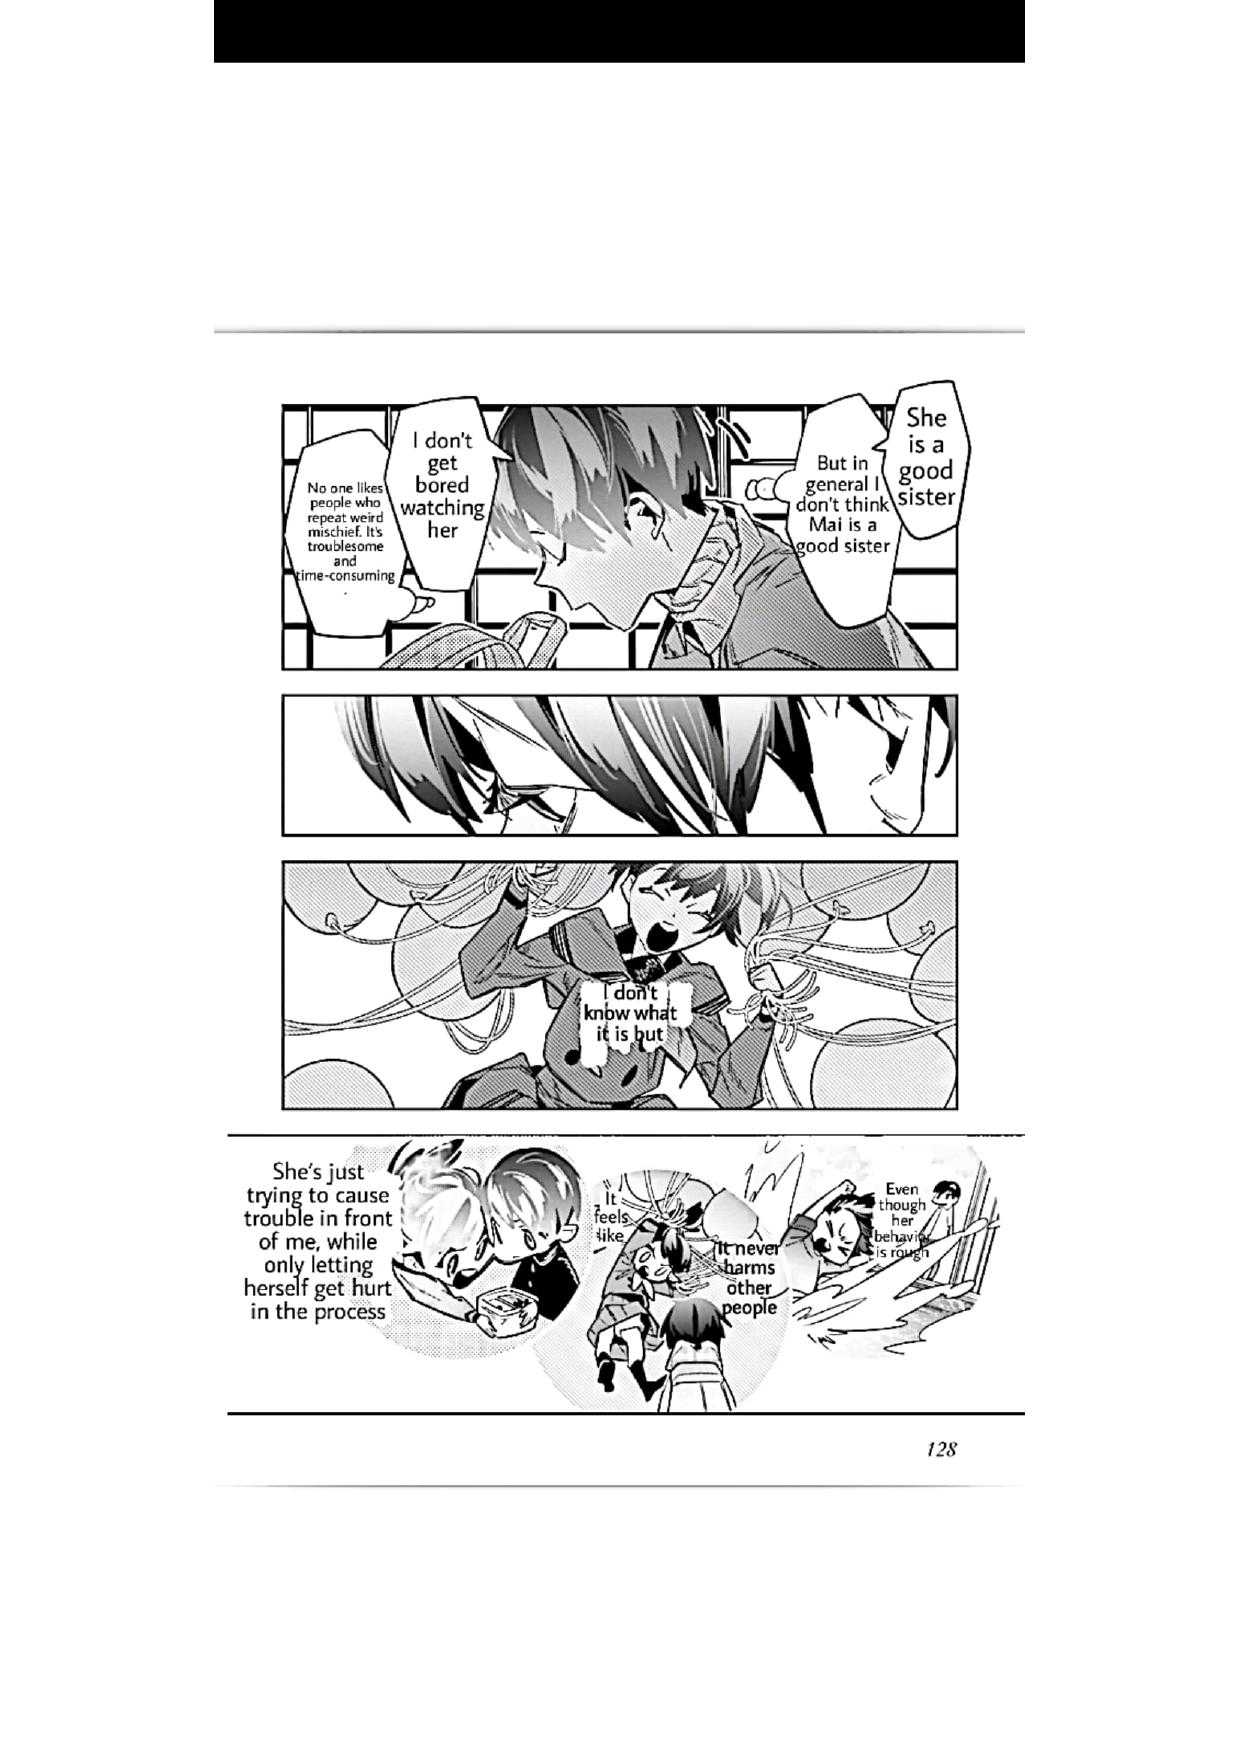 I Reincarnated As The Little Sister Of A Death Game Manga’S Murd3R Mastermind And Failed - chapter 4 - #2